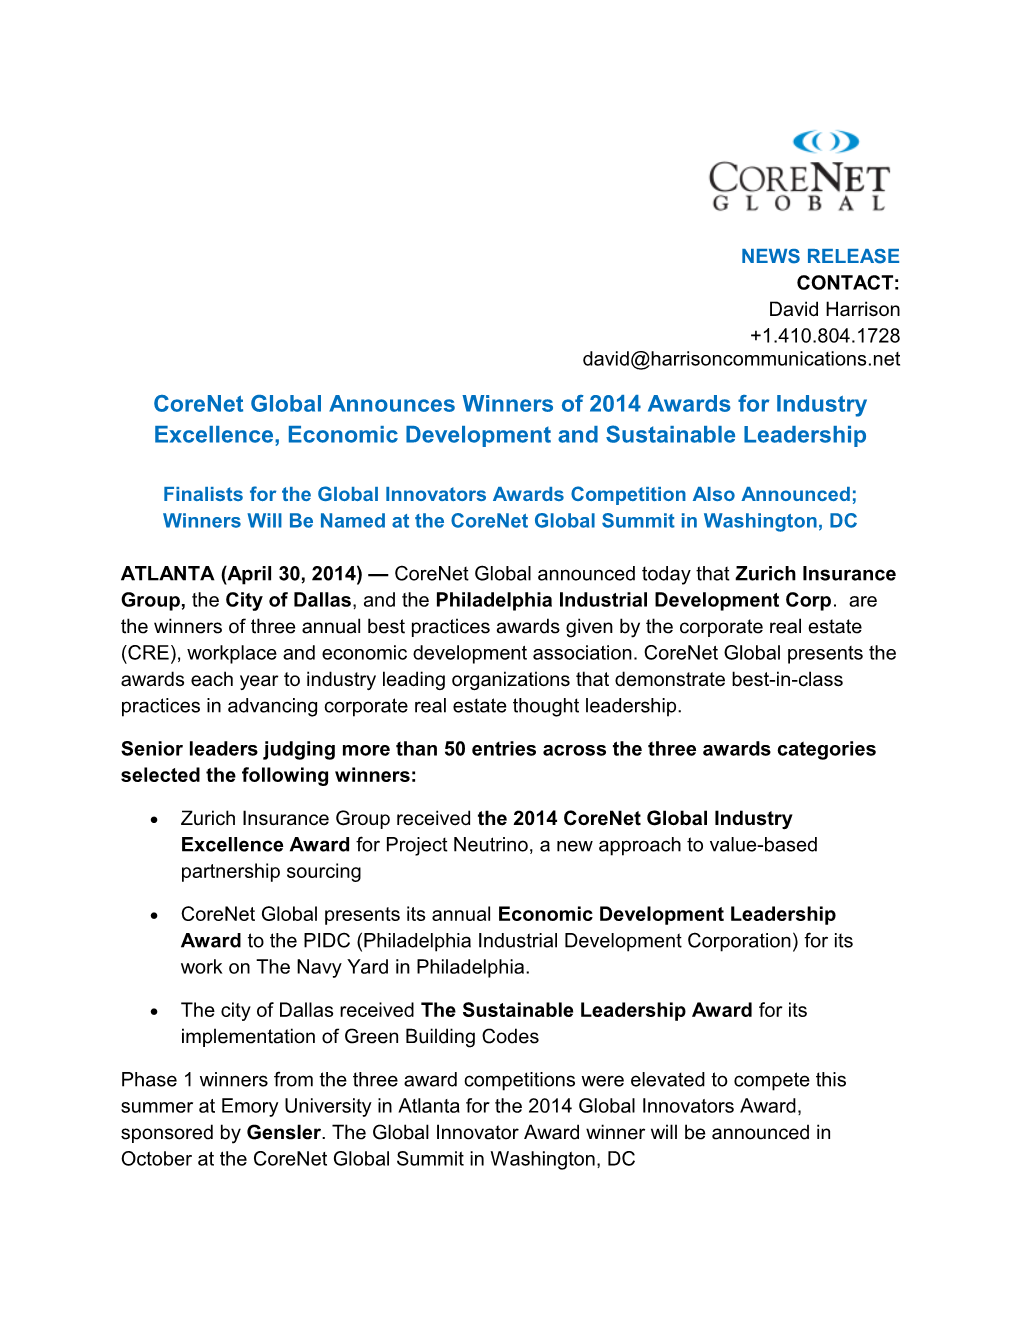 Corenet Global Announces Winners of 2014 Awards for Industry Excellence, Economic Development